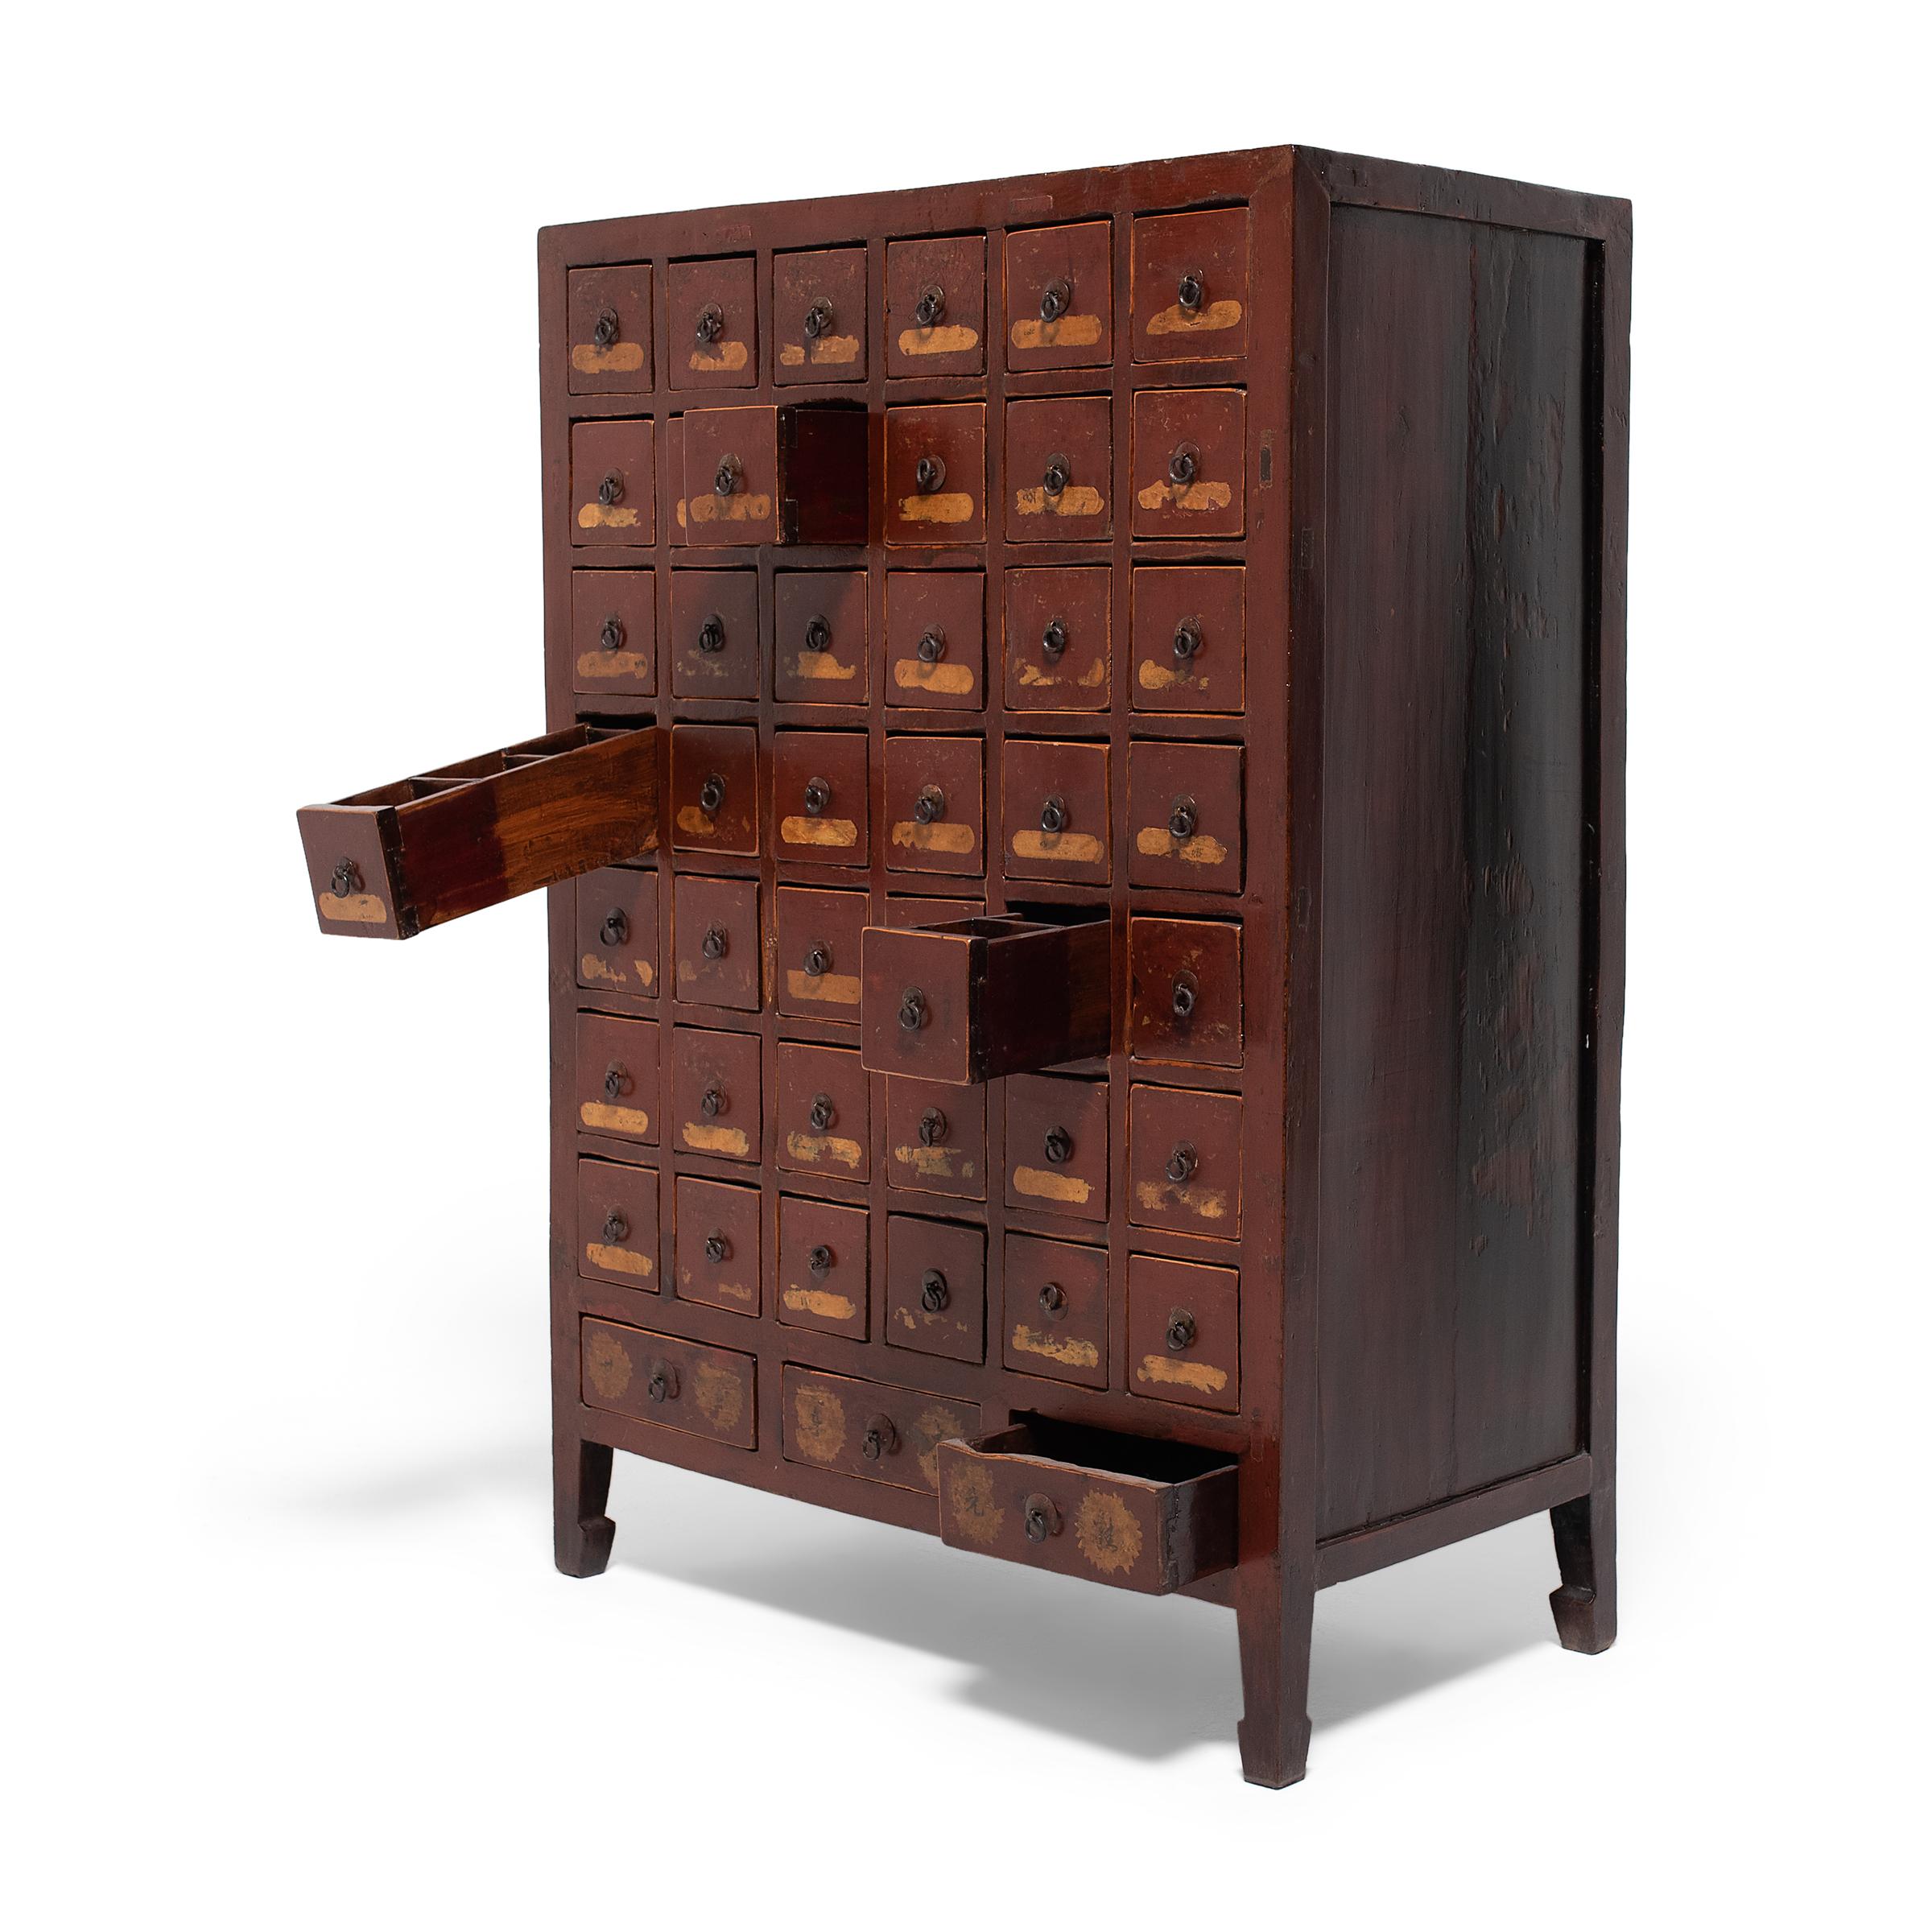 Elm Chinese Red Lacquer Apothecary Cabinet, c. 1850